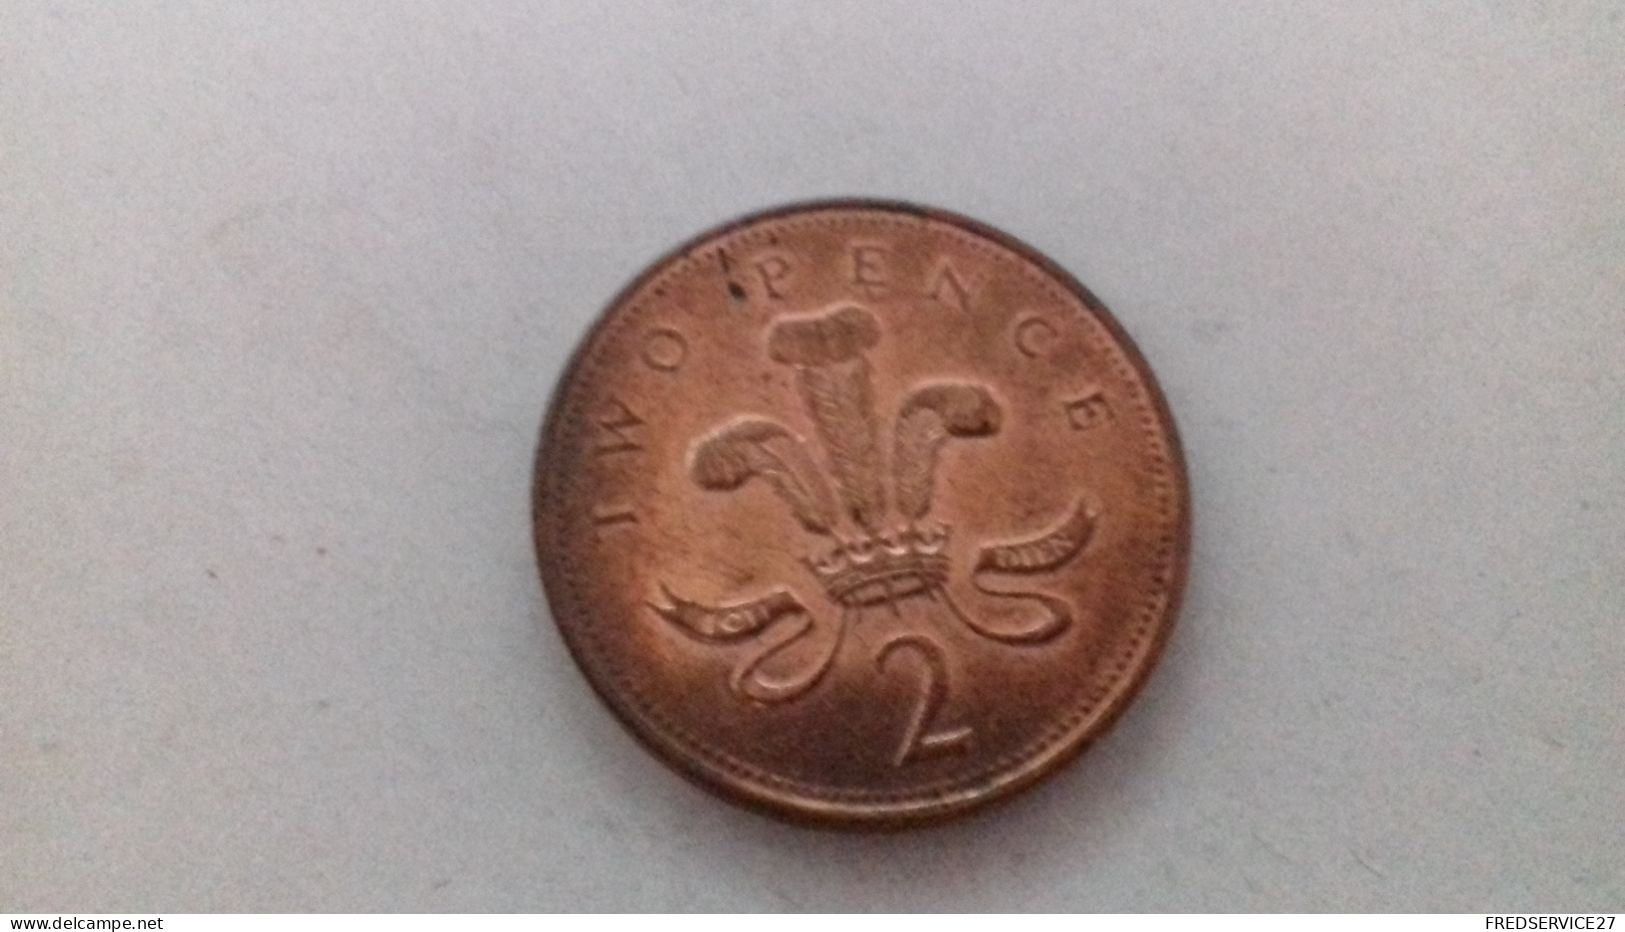 BS10 / 2 PENCE 1997 - 2 Pence & 2 New Pence